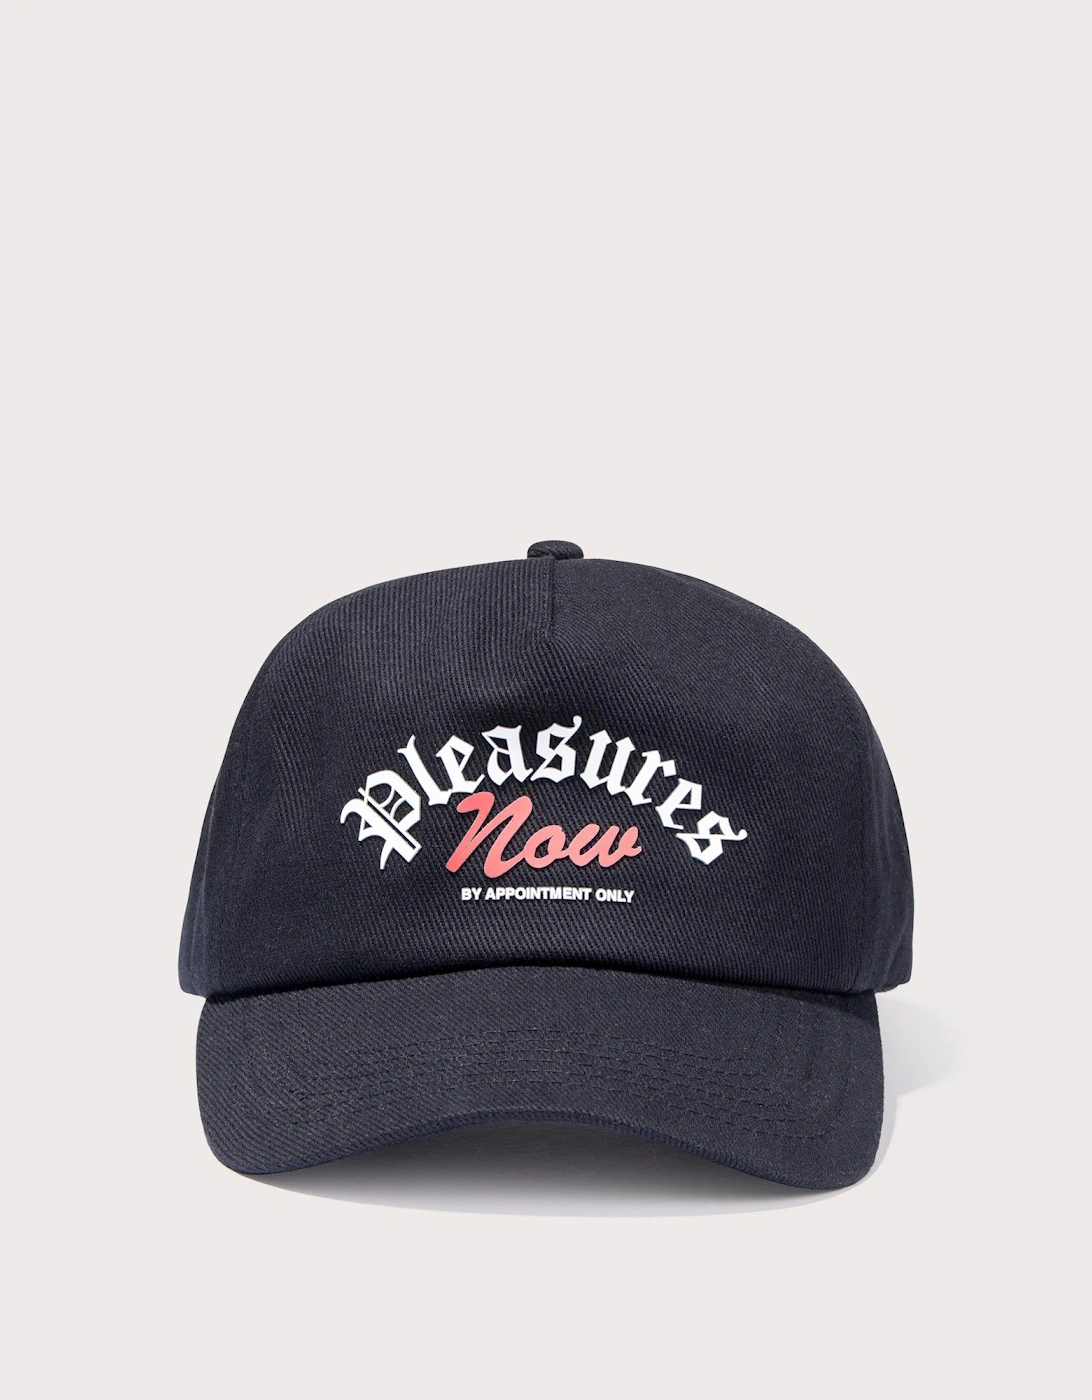 Appointment Unconstructed Snapback Cap